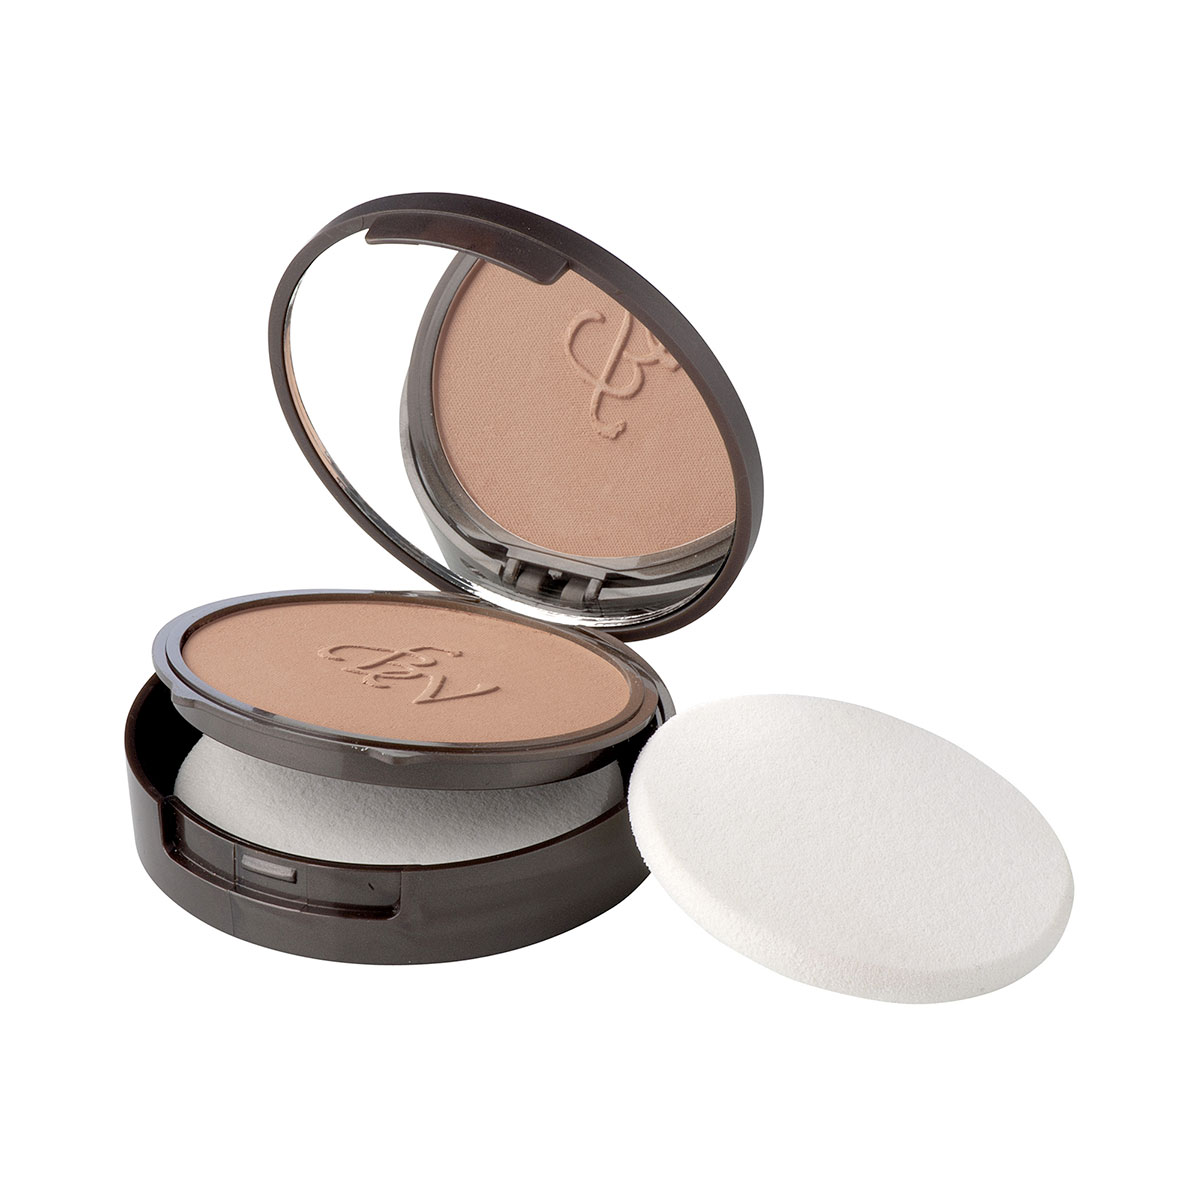 Wet & dry foundation with White Tea extract and Vitamin E ( 9.5 g)